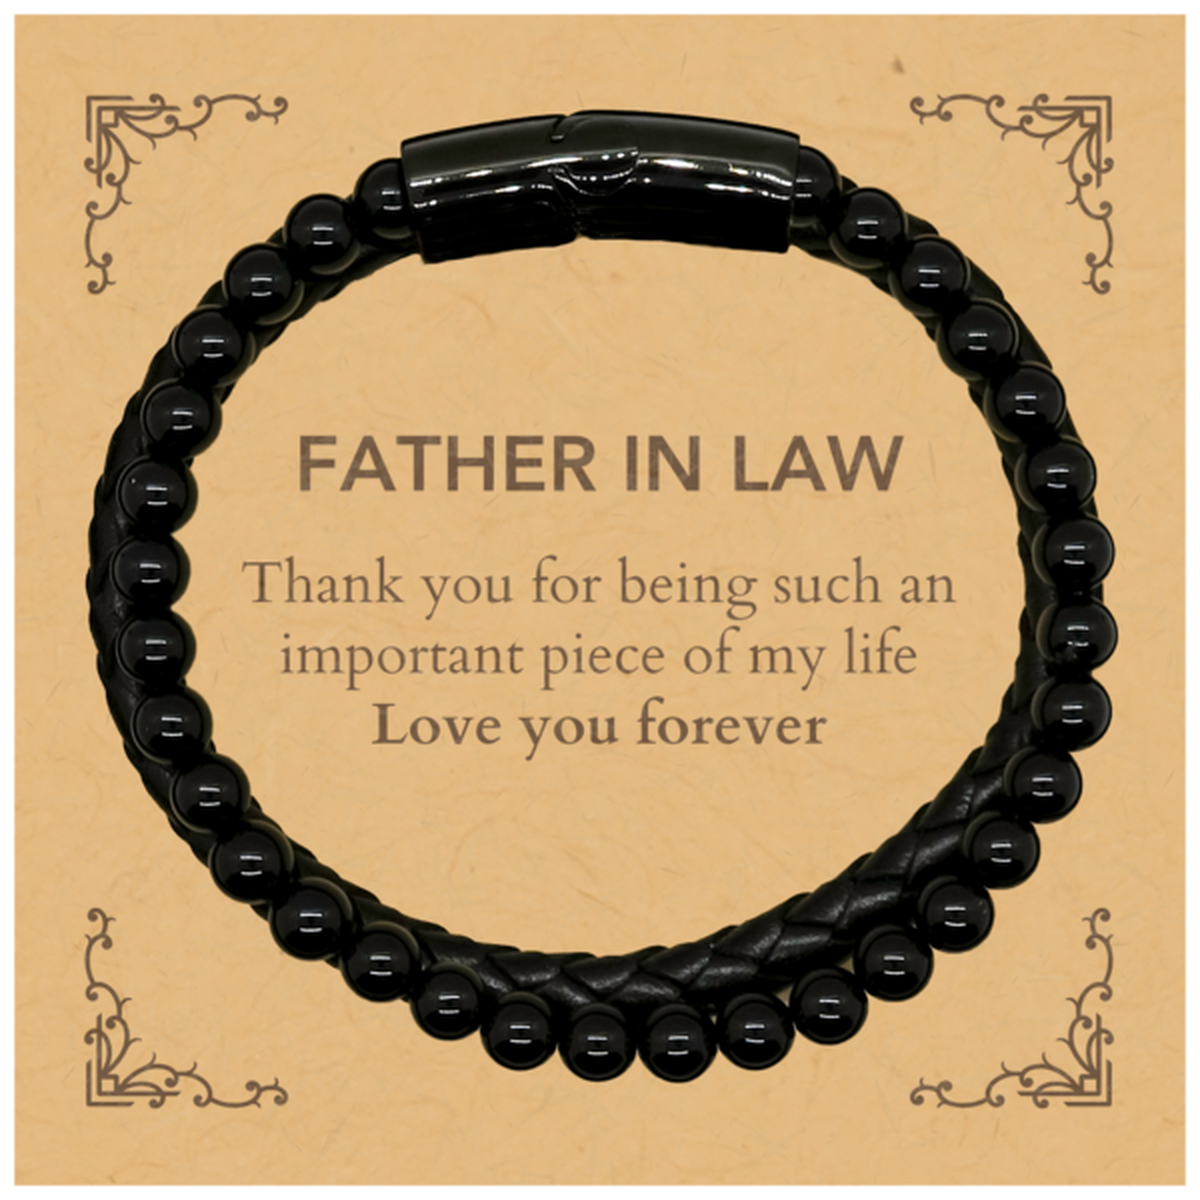 Appropriate Father In Law Stone Leather Bracelets Epic Birthday Gifts for Father In Law Thank you for being such an important piece of my life Father In Law Christmas Mothers Fathers Day